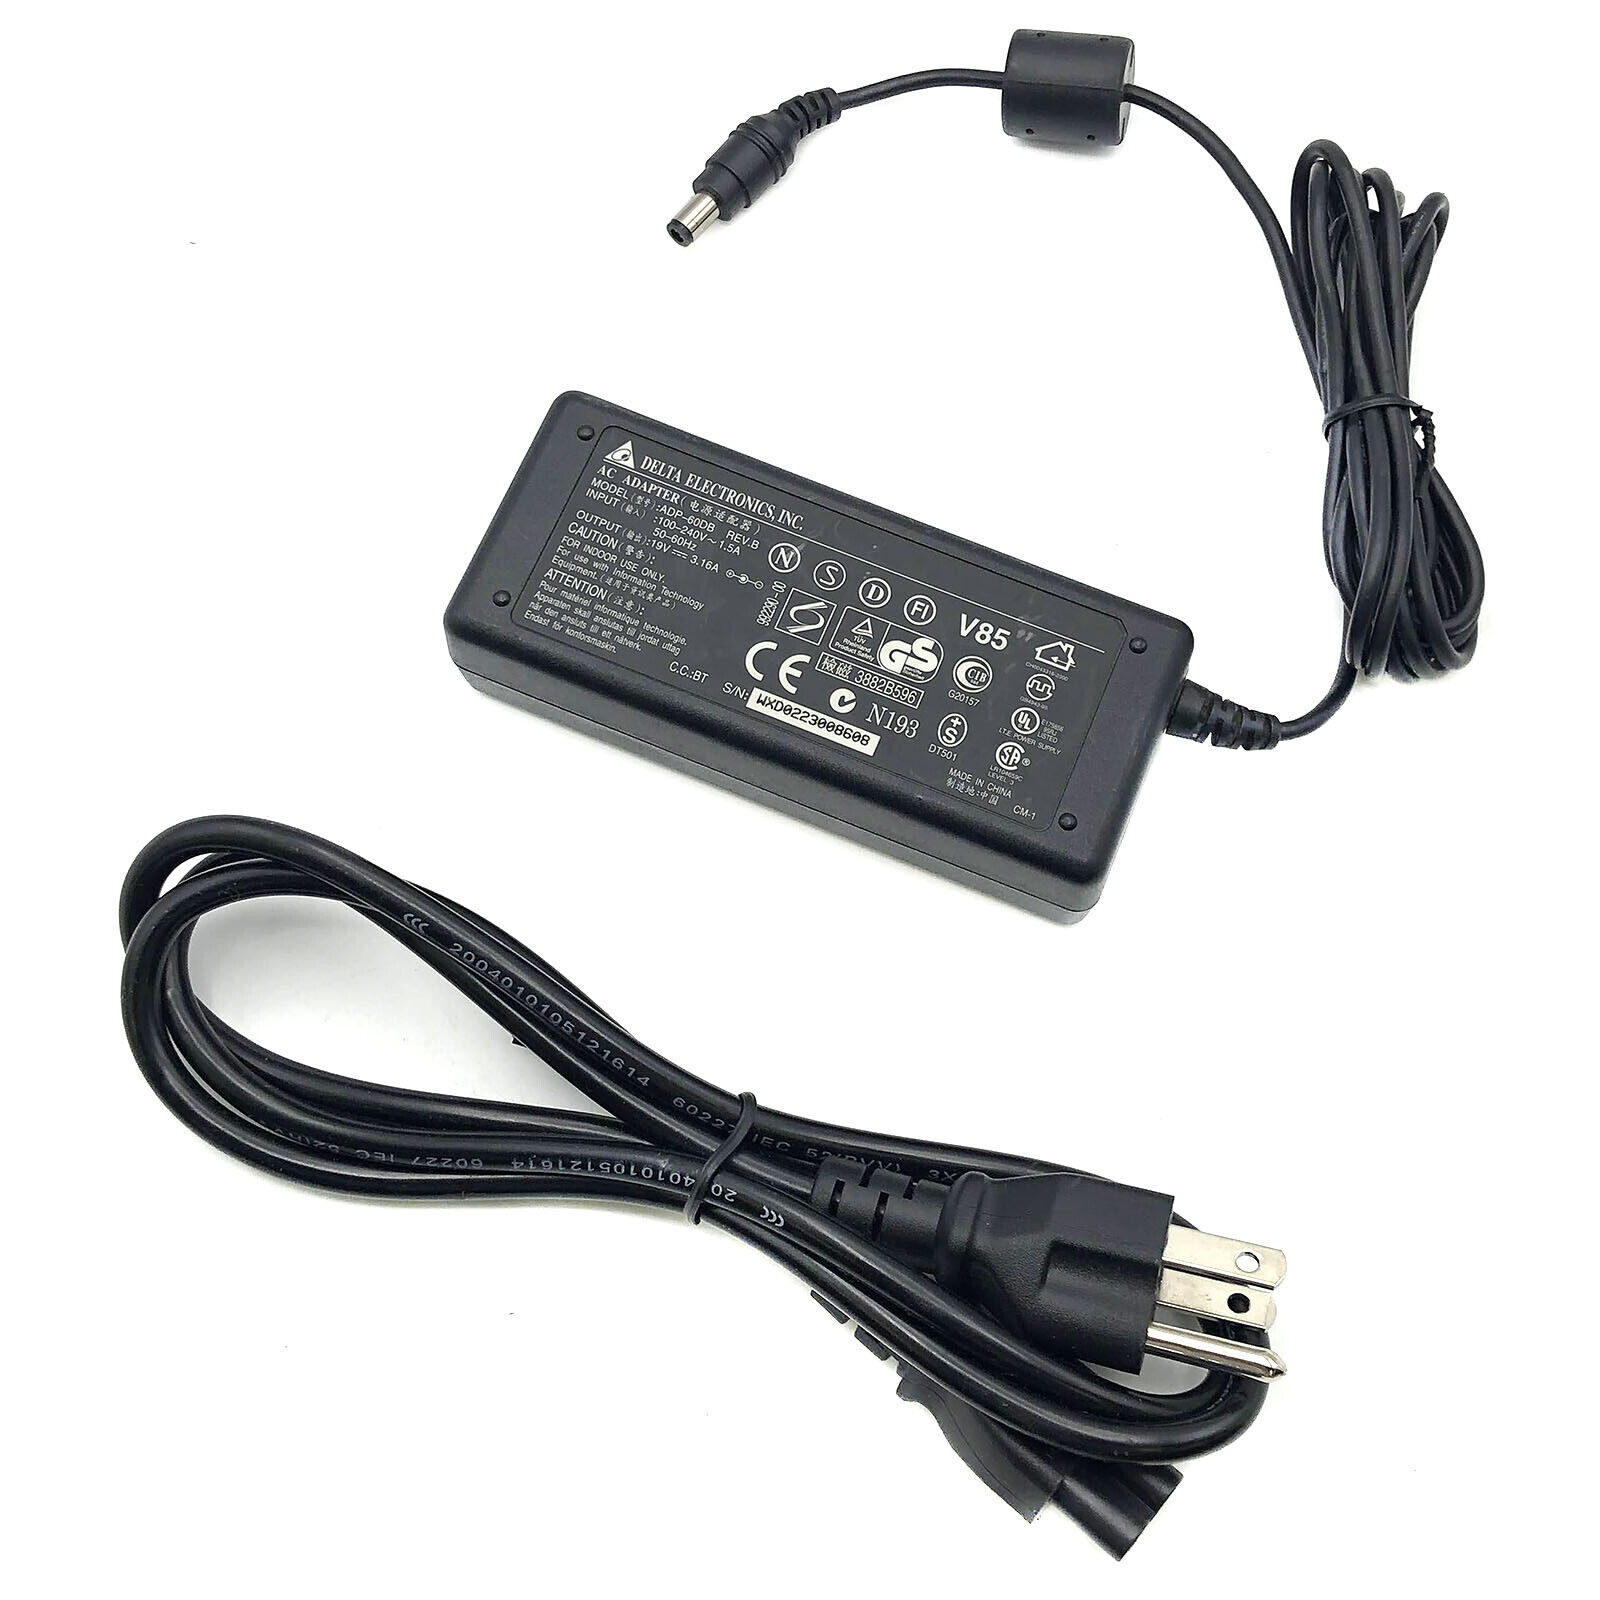 *Brand NEW*19V 3.16A 60W AC Power Adapter Genuine Delta ADP-60DB Laptop Charger w/PC OEM POWER Supply